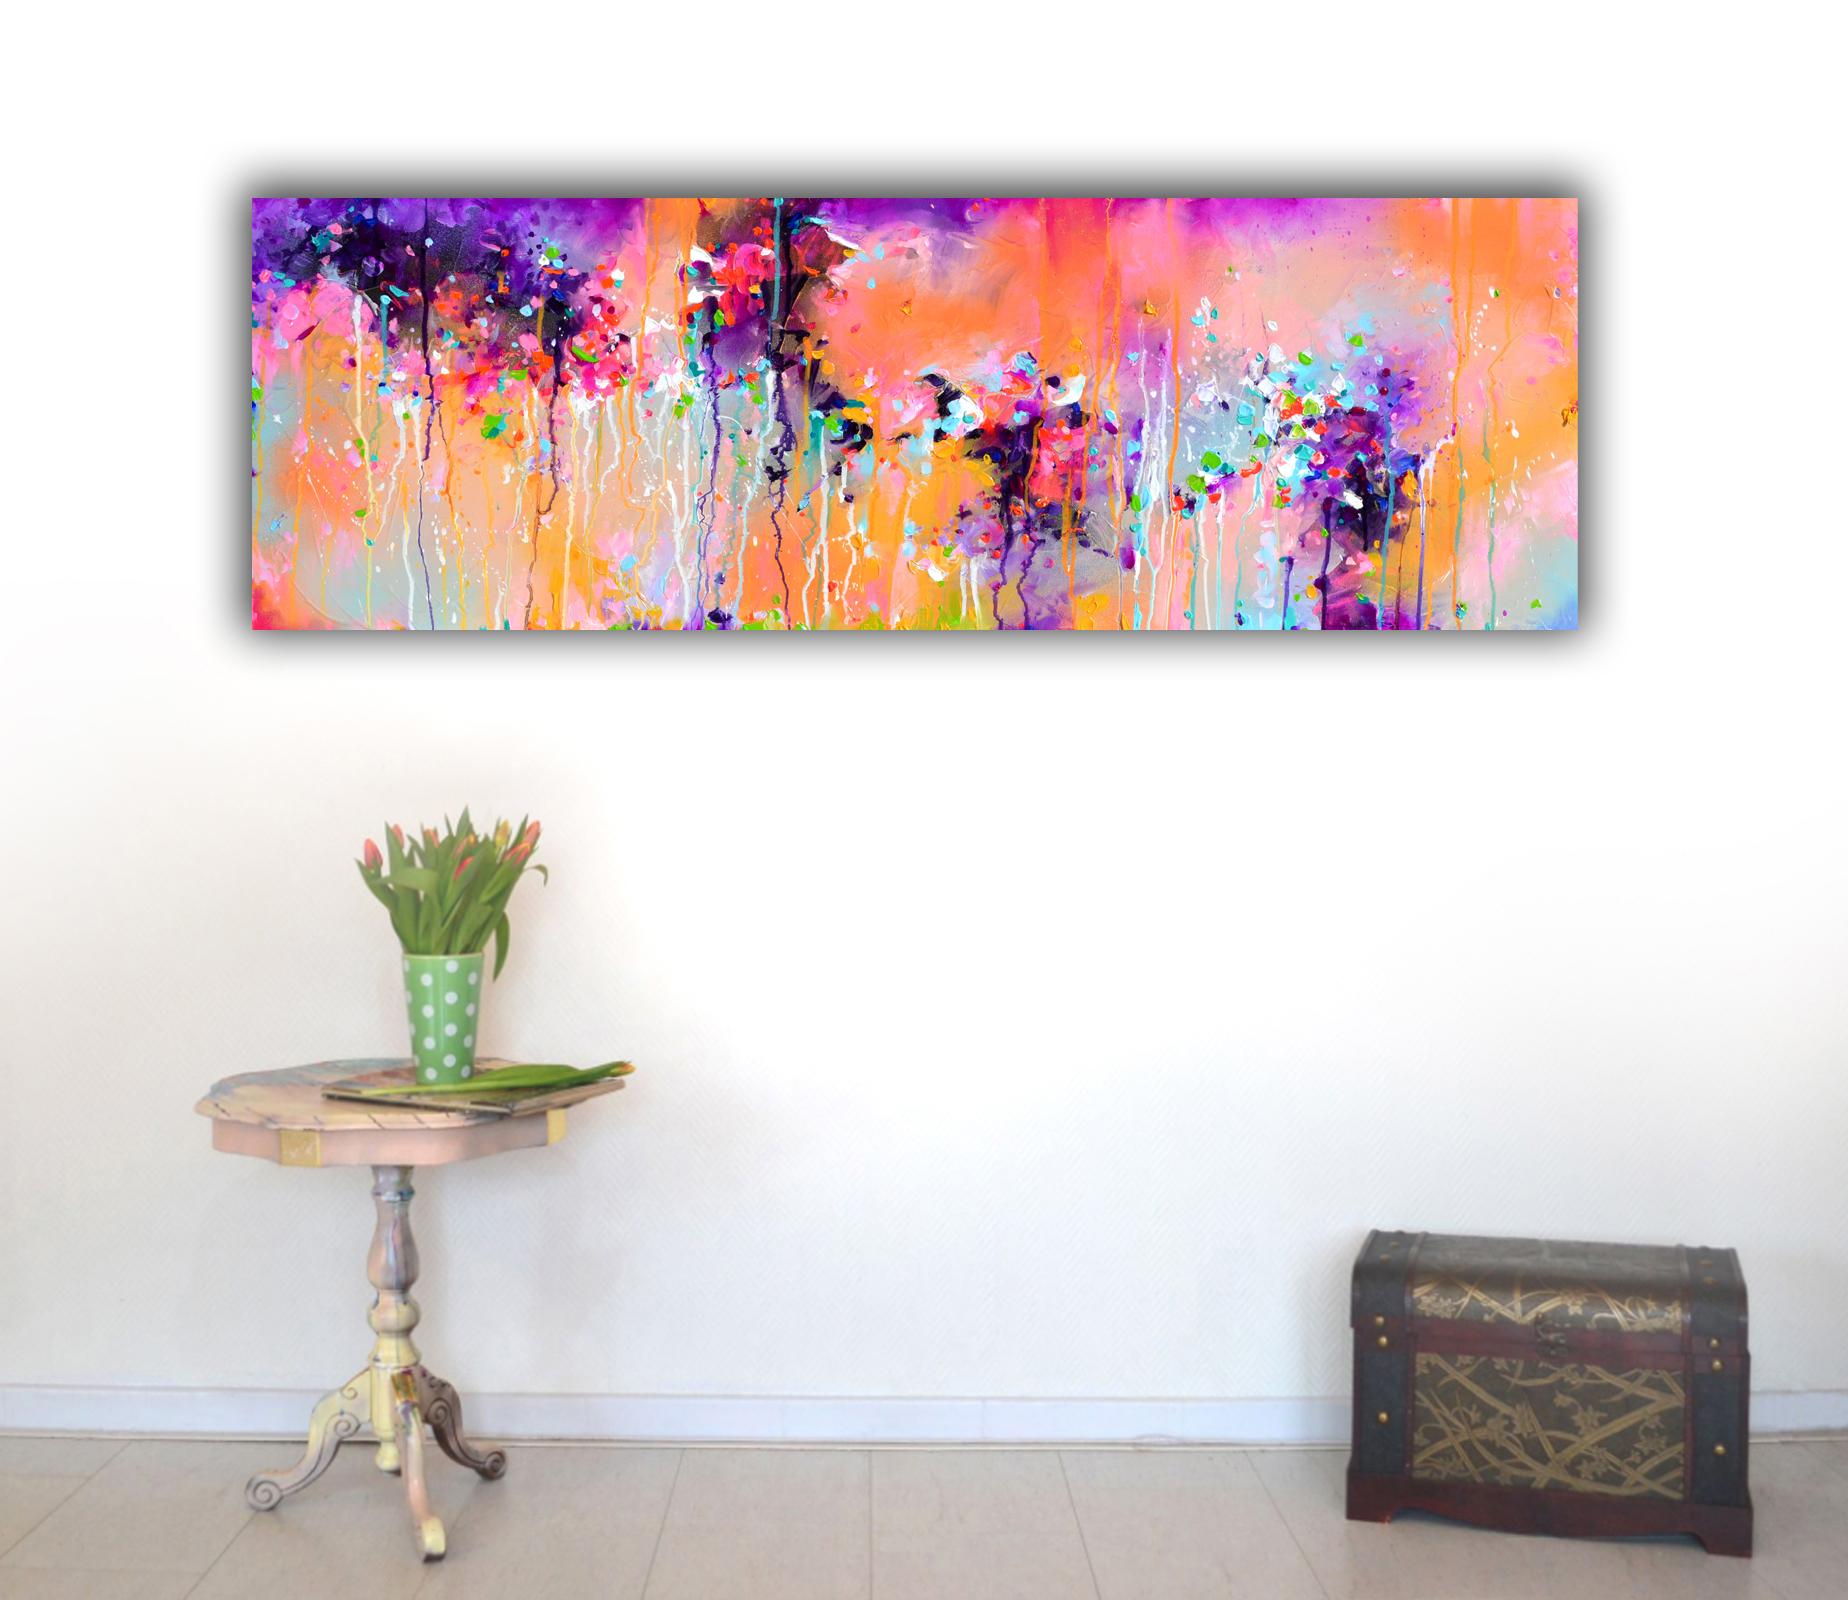 Ready to hang with the edges painted

A beautiful modern abstract, 100% handmade painting, made with professional varnished acrylics and Amsterdam acrylic sprays on stretched heavy canvas.

Dimensions: 120X40X2 cm, 47.3x15.8x0.8 inches

It is signed